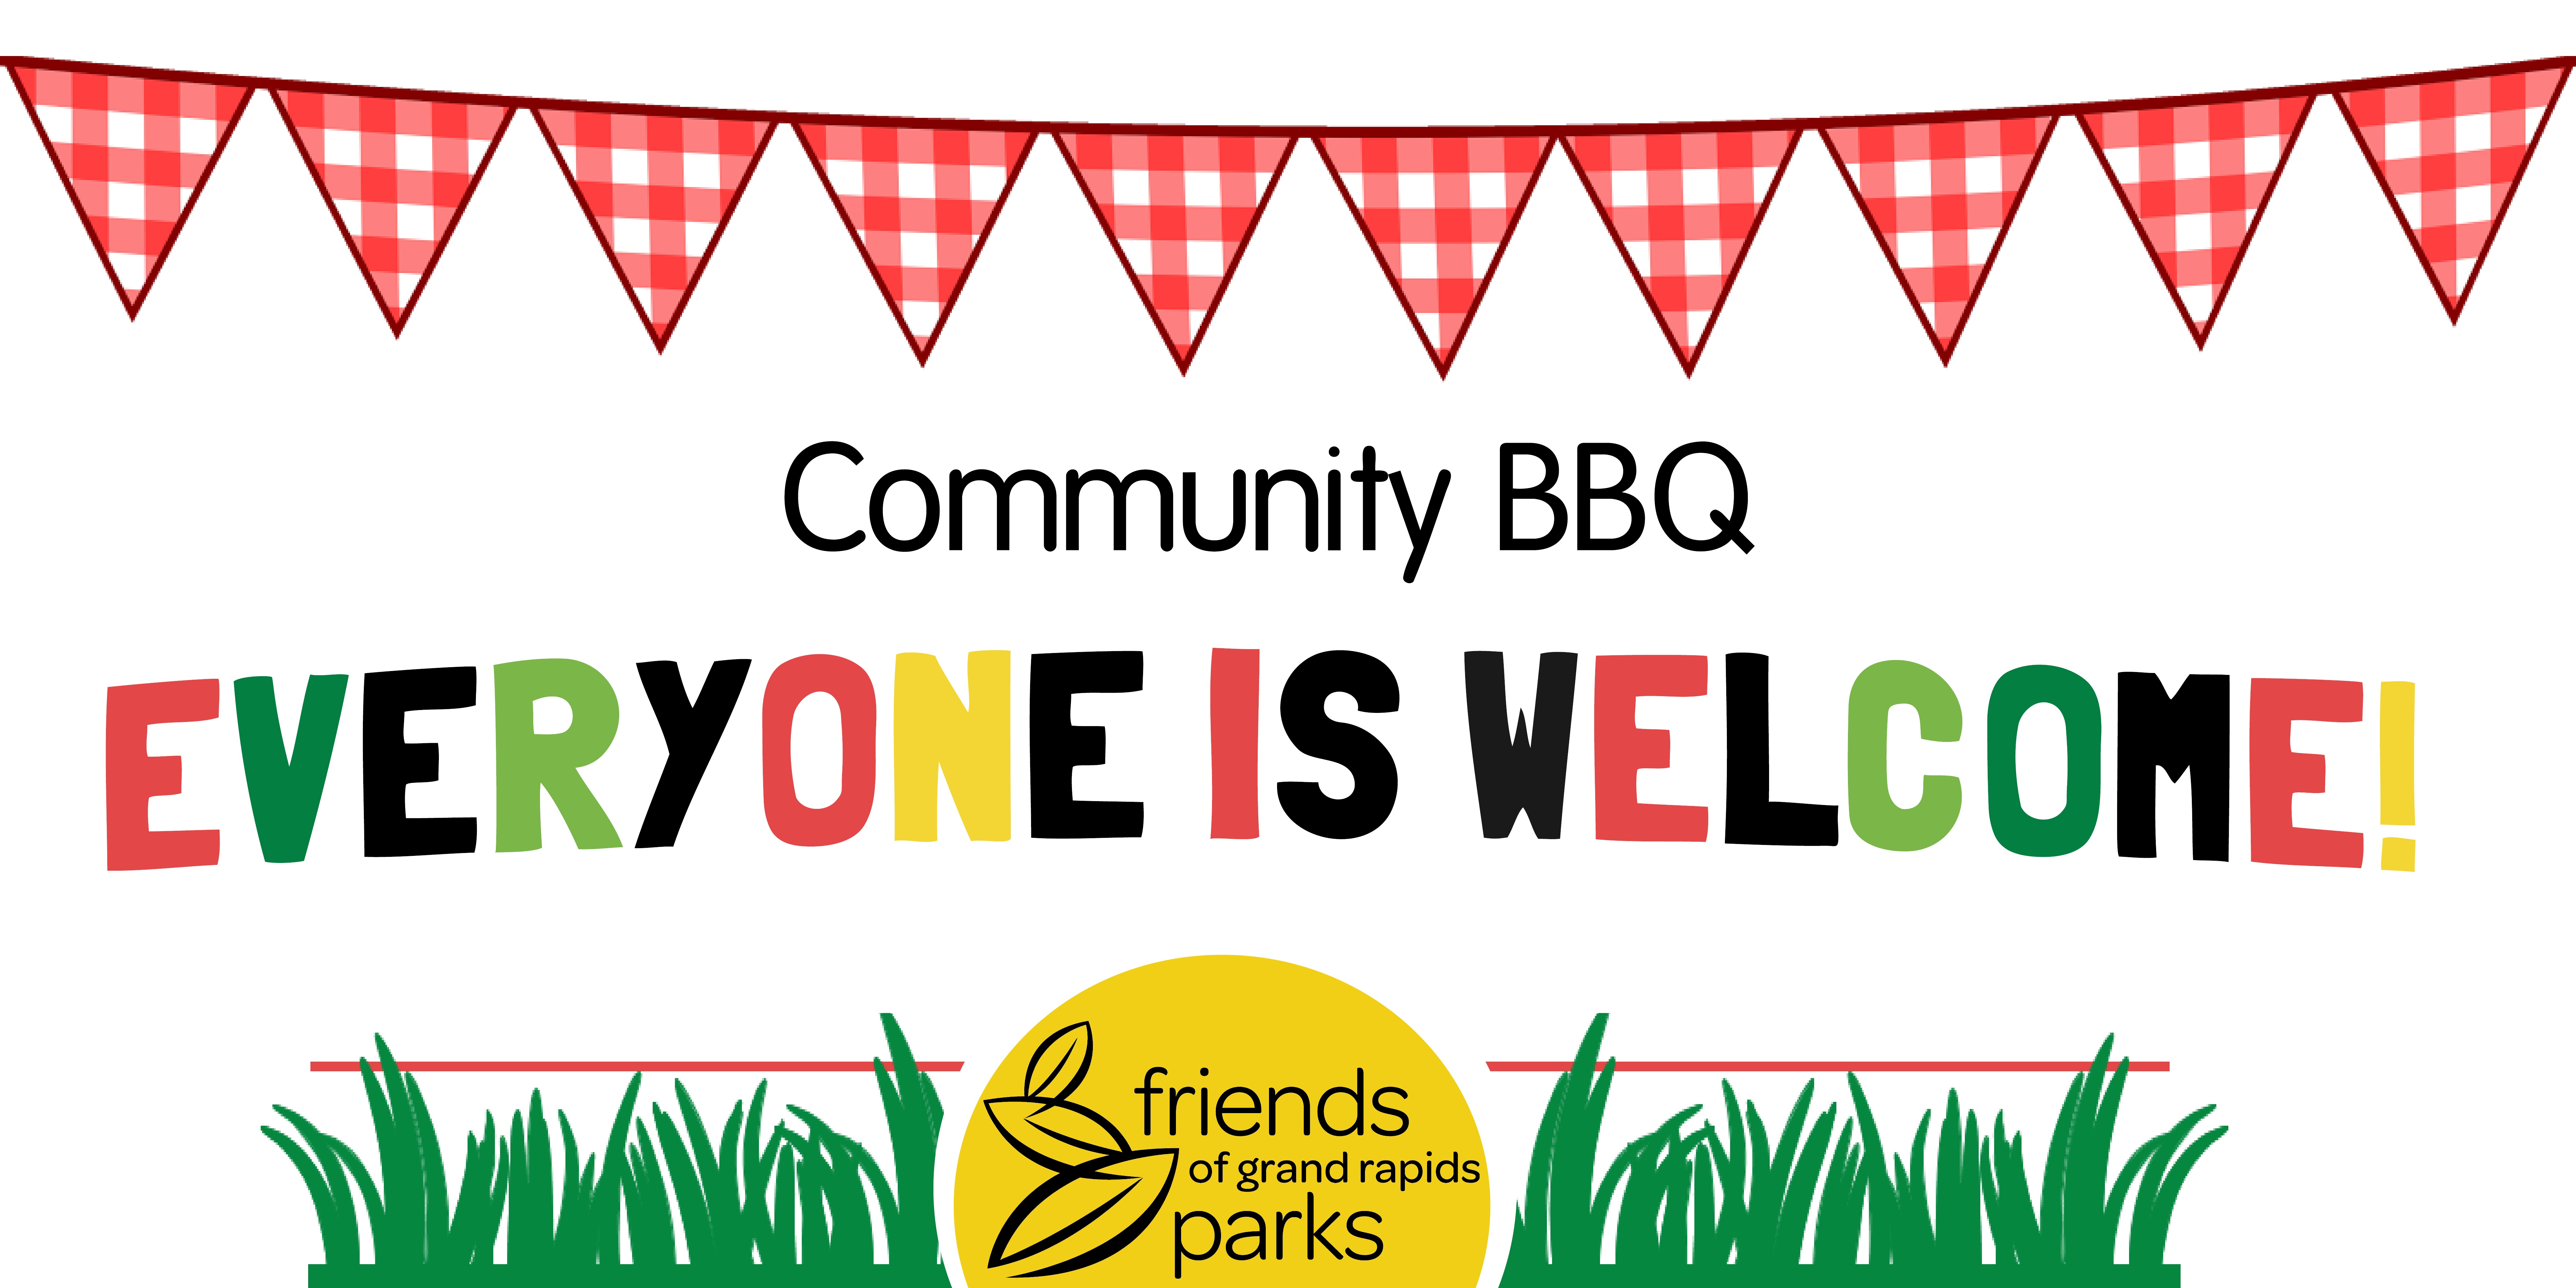 Friends of grand rapids. Barbecue clipart banner